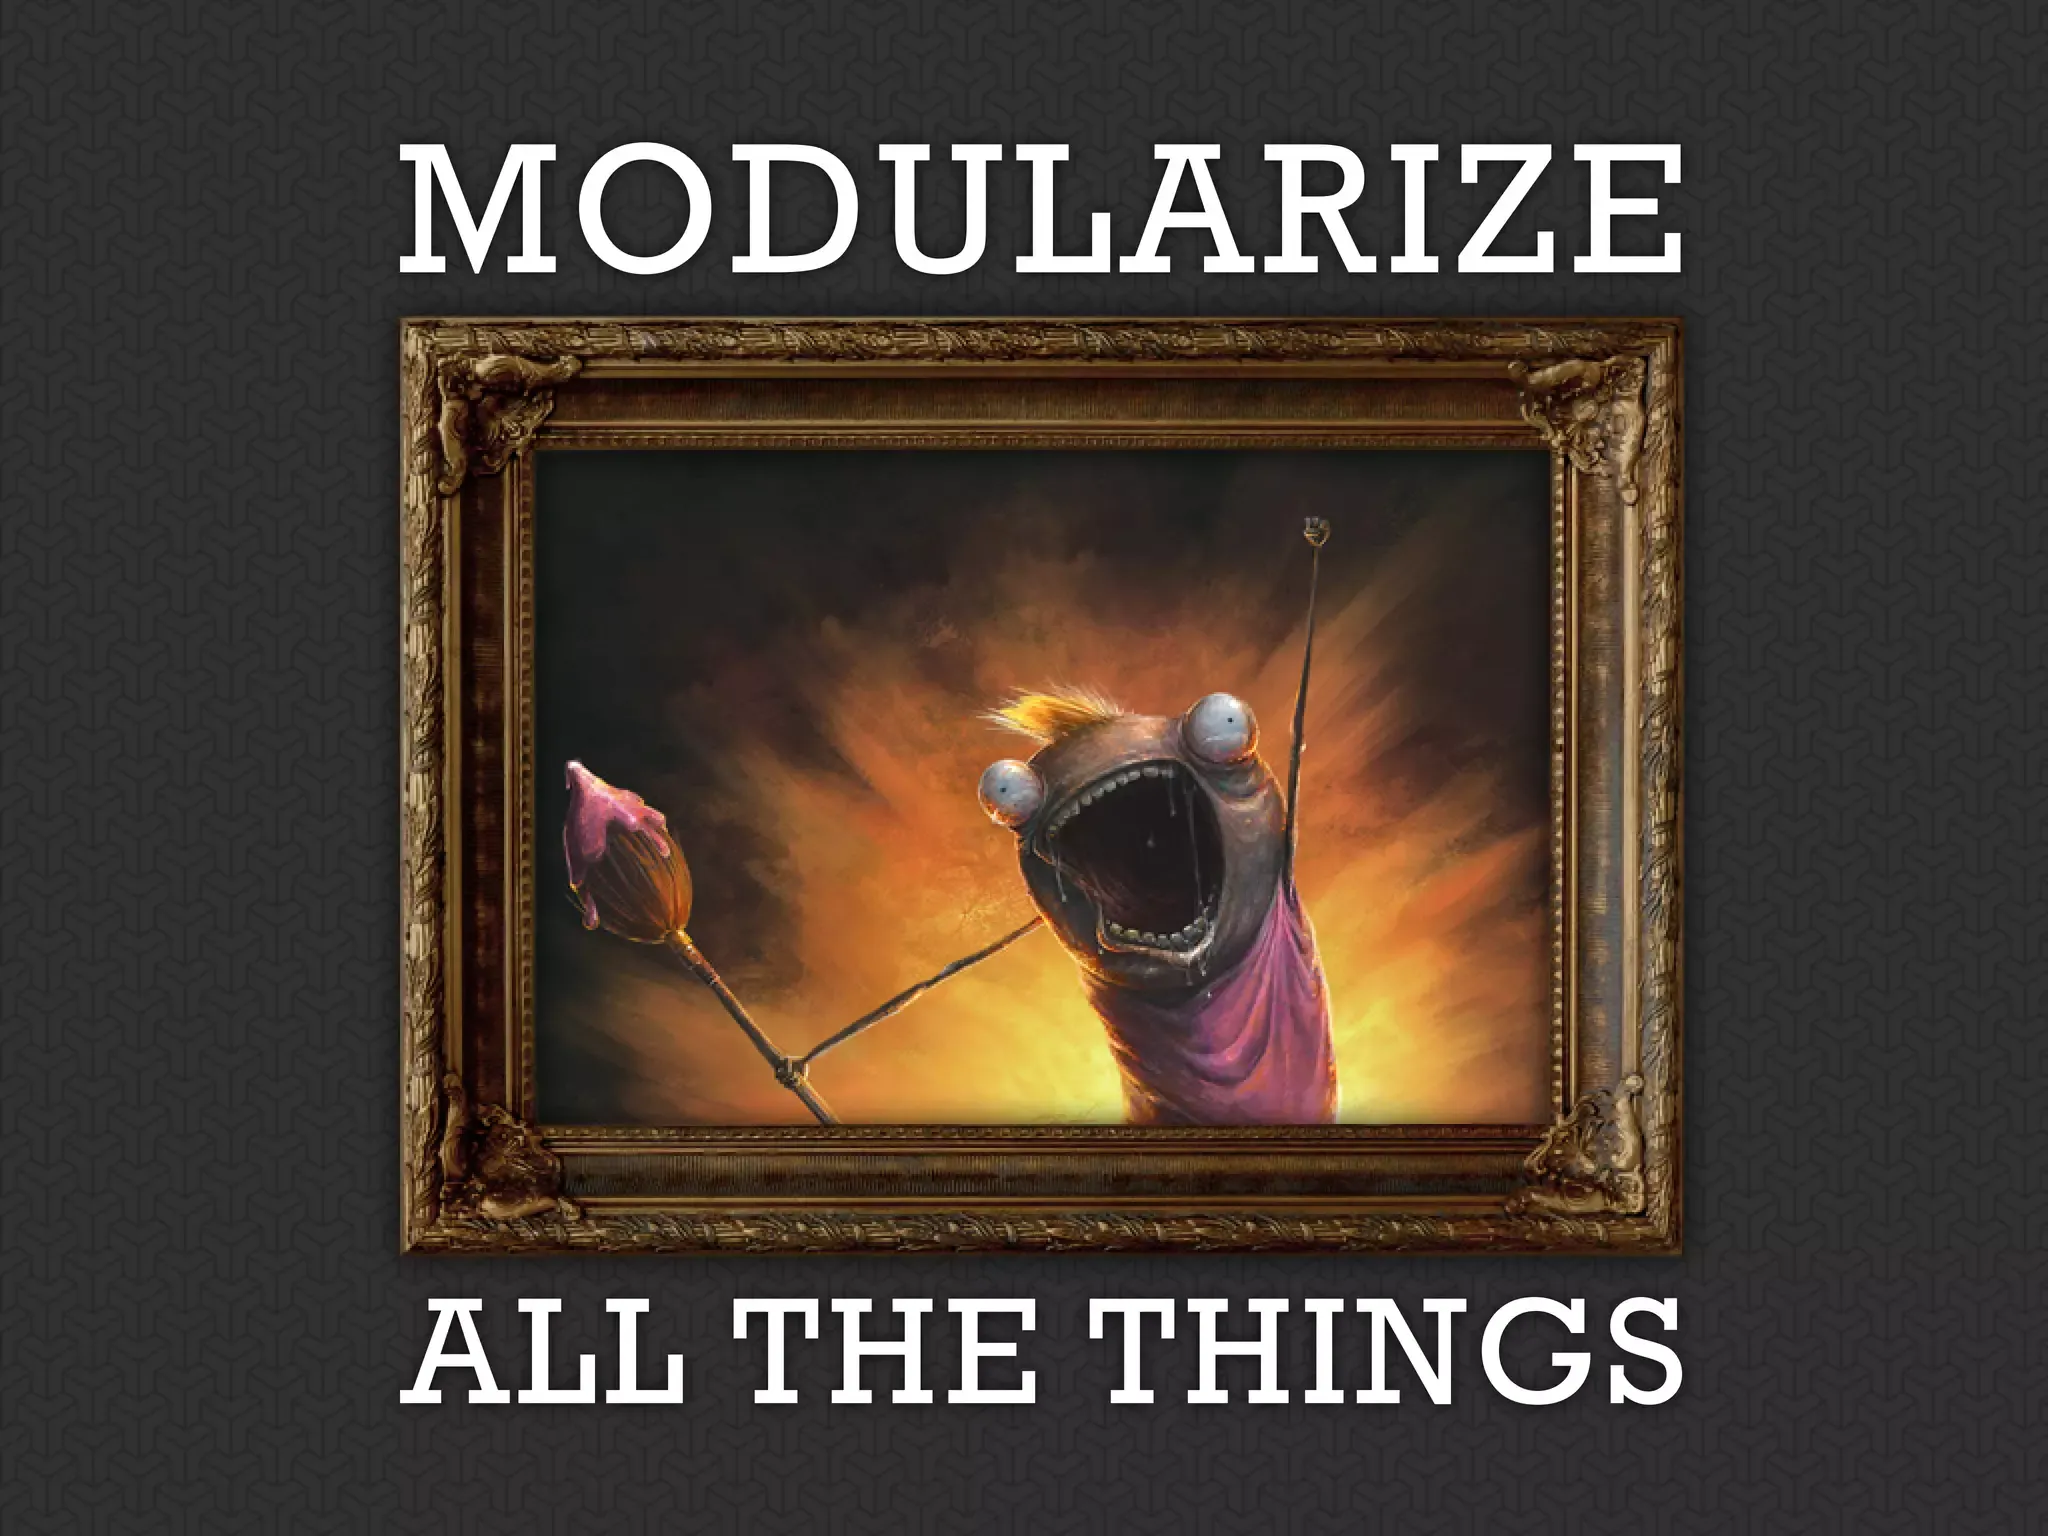 Modularize all the things